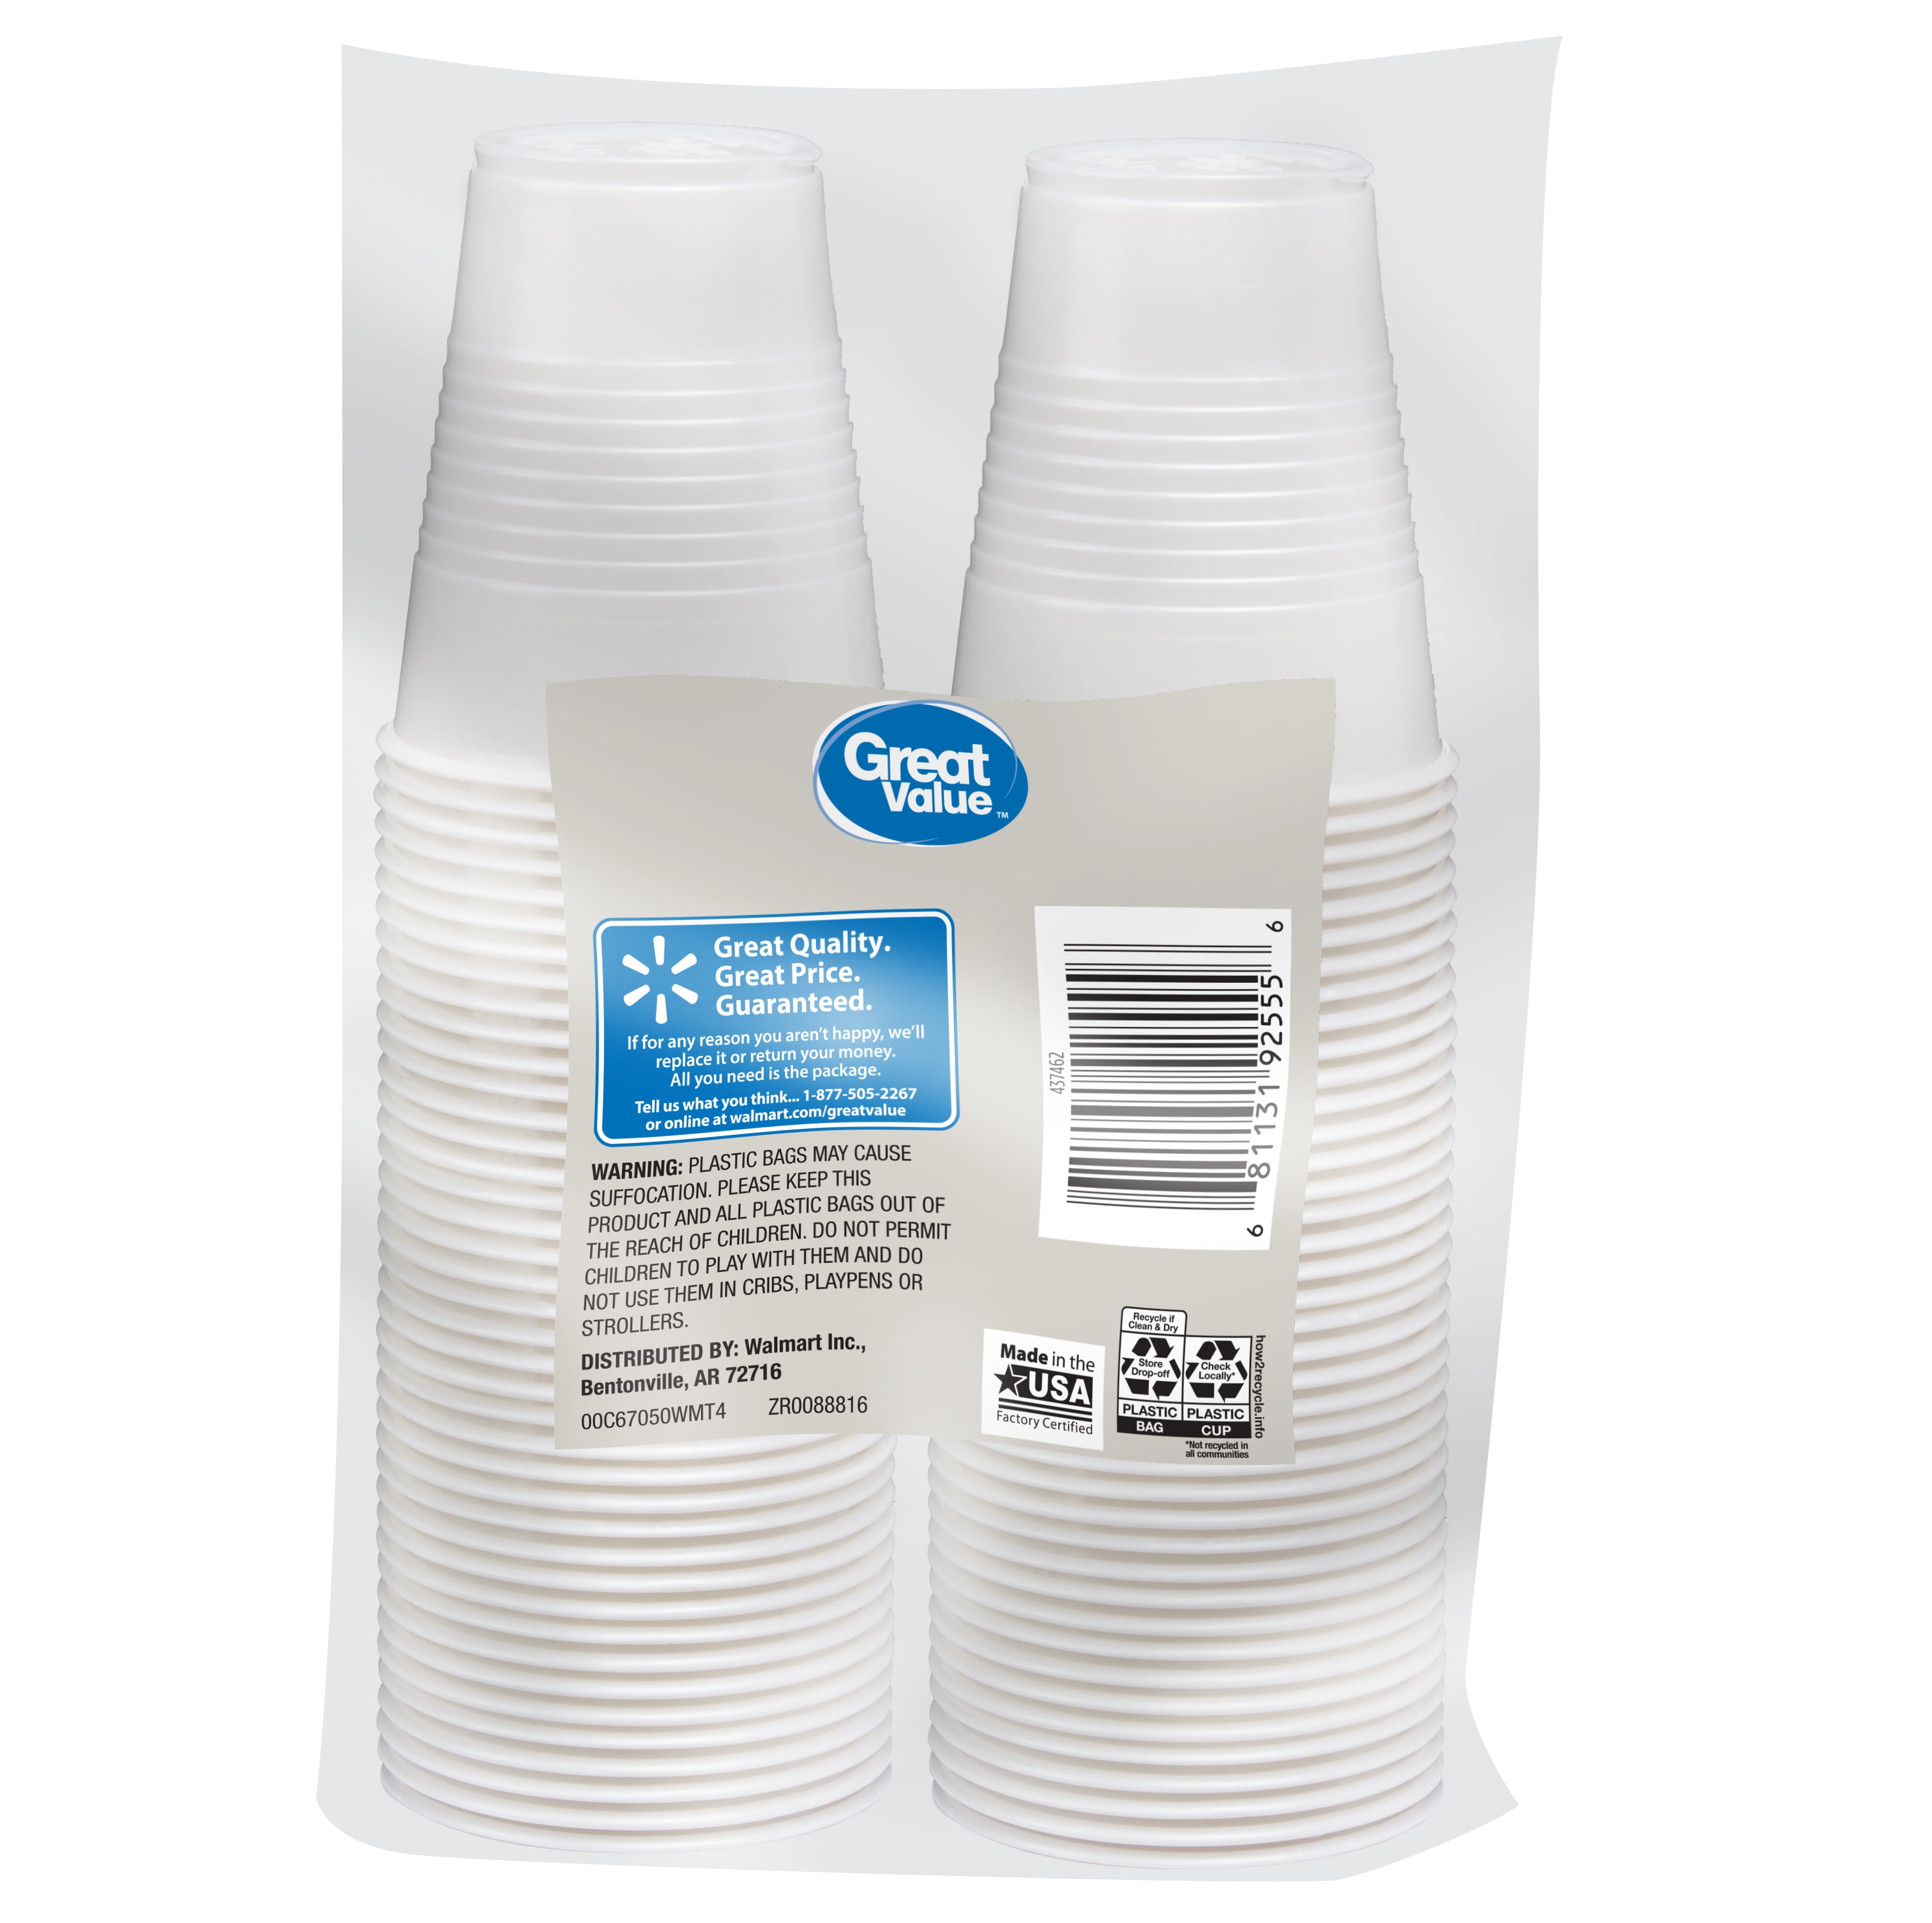 Upper Midland Products 5 Oz Plastic Cups, 500 CT 5 Oz Cups Small Plastic  Cups, These Small Disposabl…See more Upper Midland Products 5 Oz Plastic